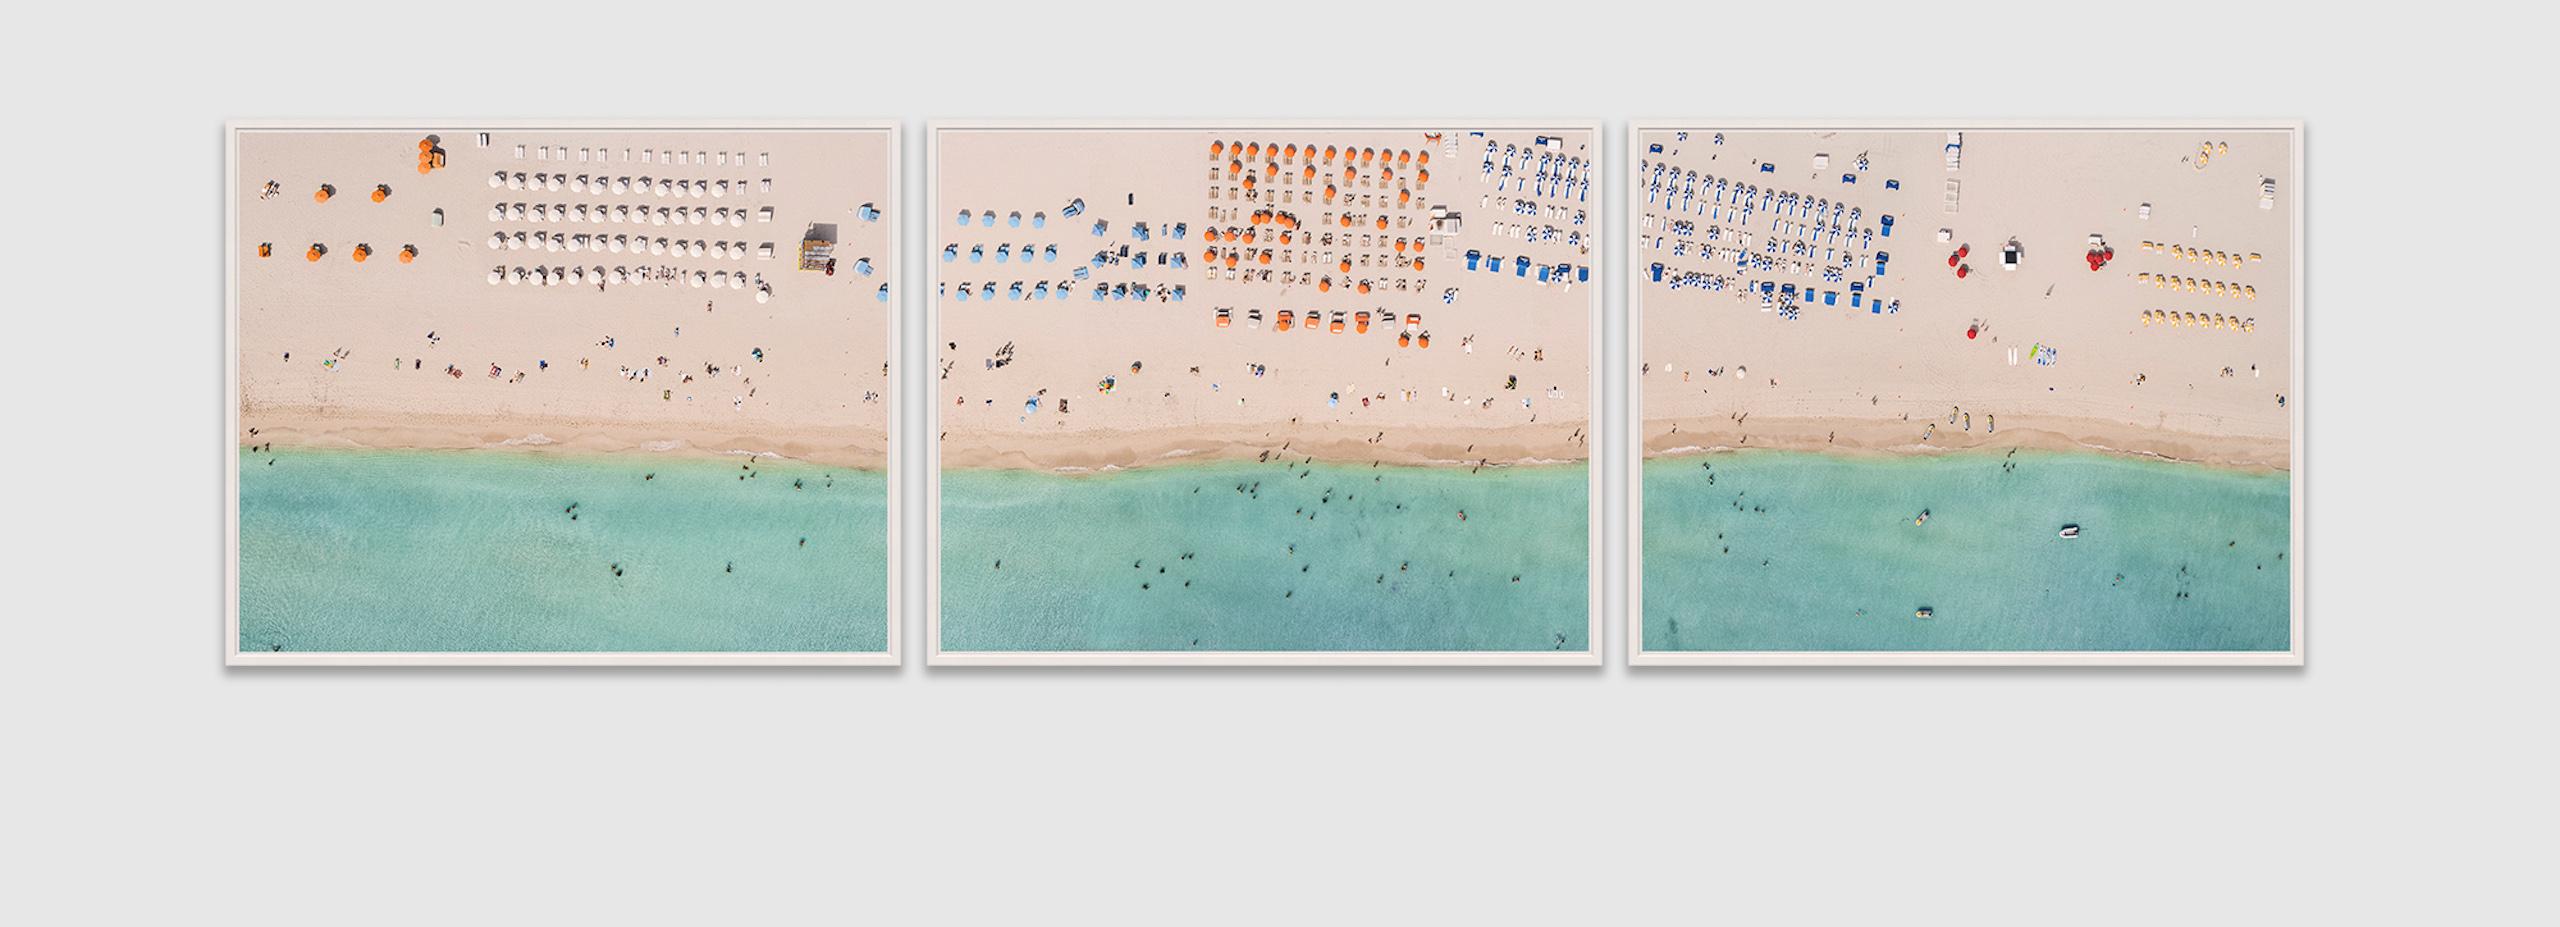 Miami II 001 by Bernhard Lang - Aerial abstract photography, beach, triptych For Sale 2